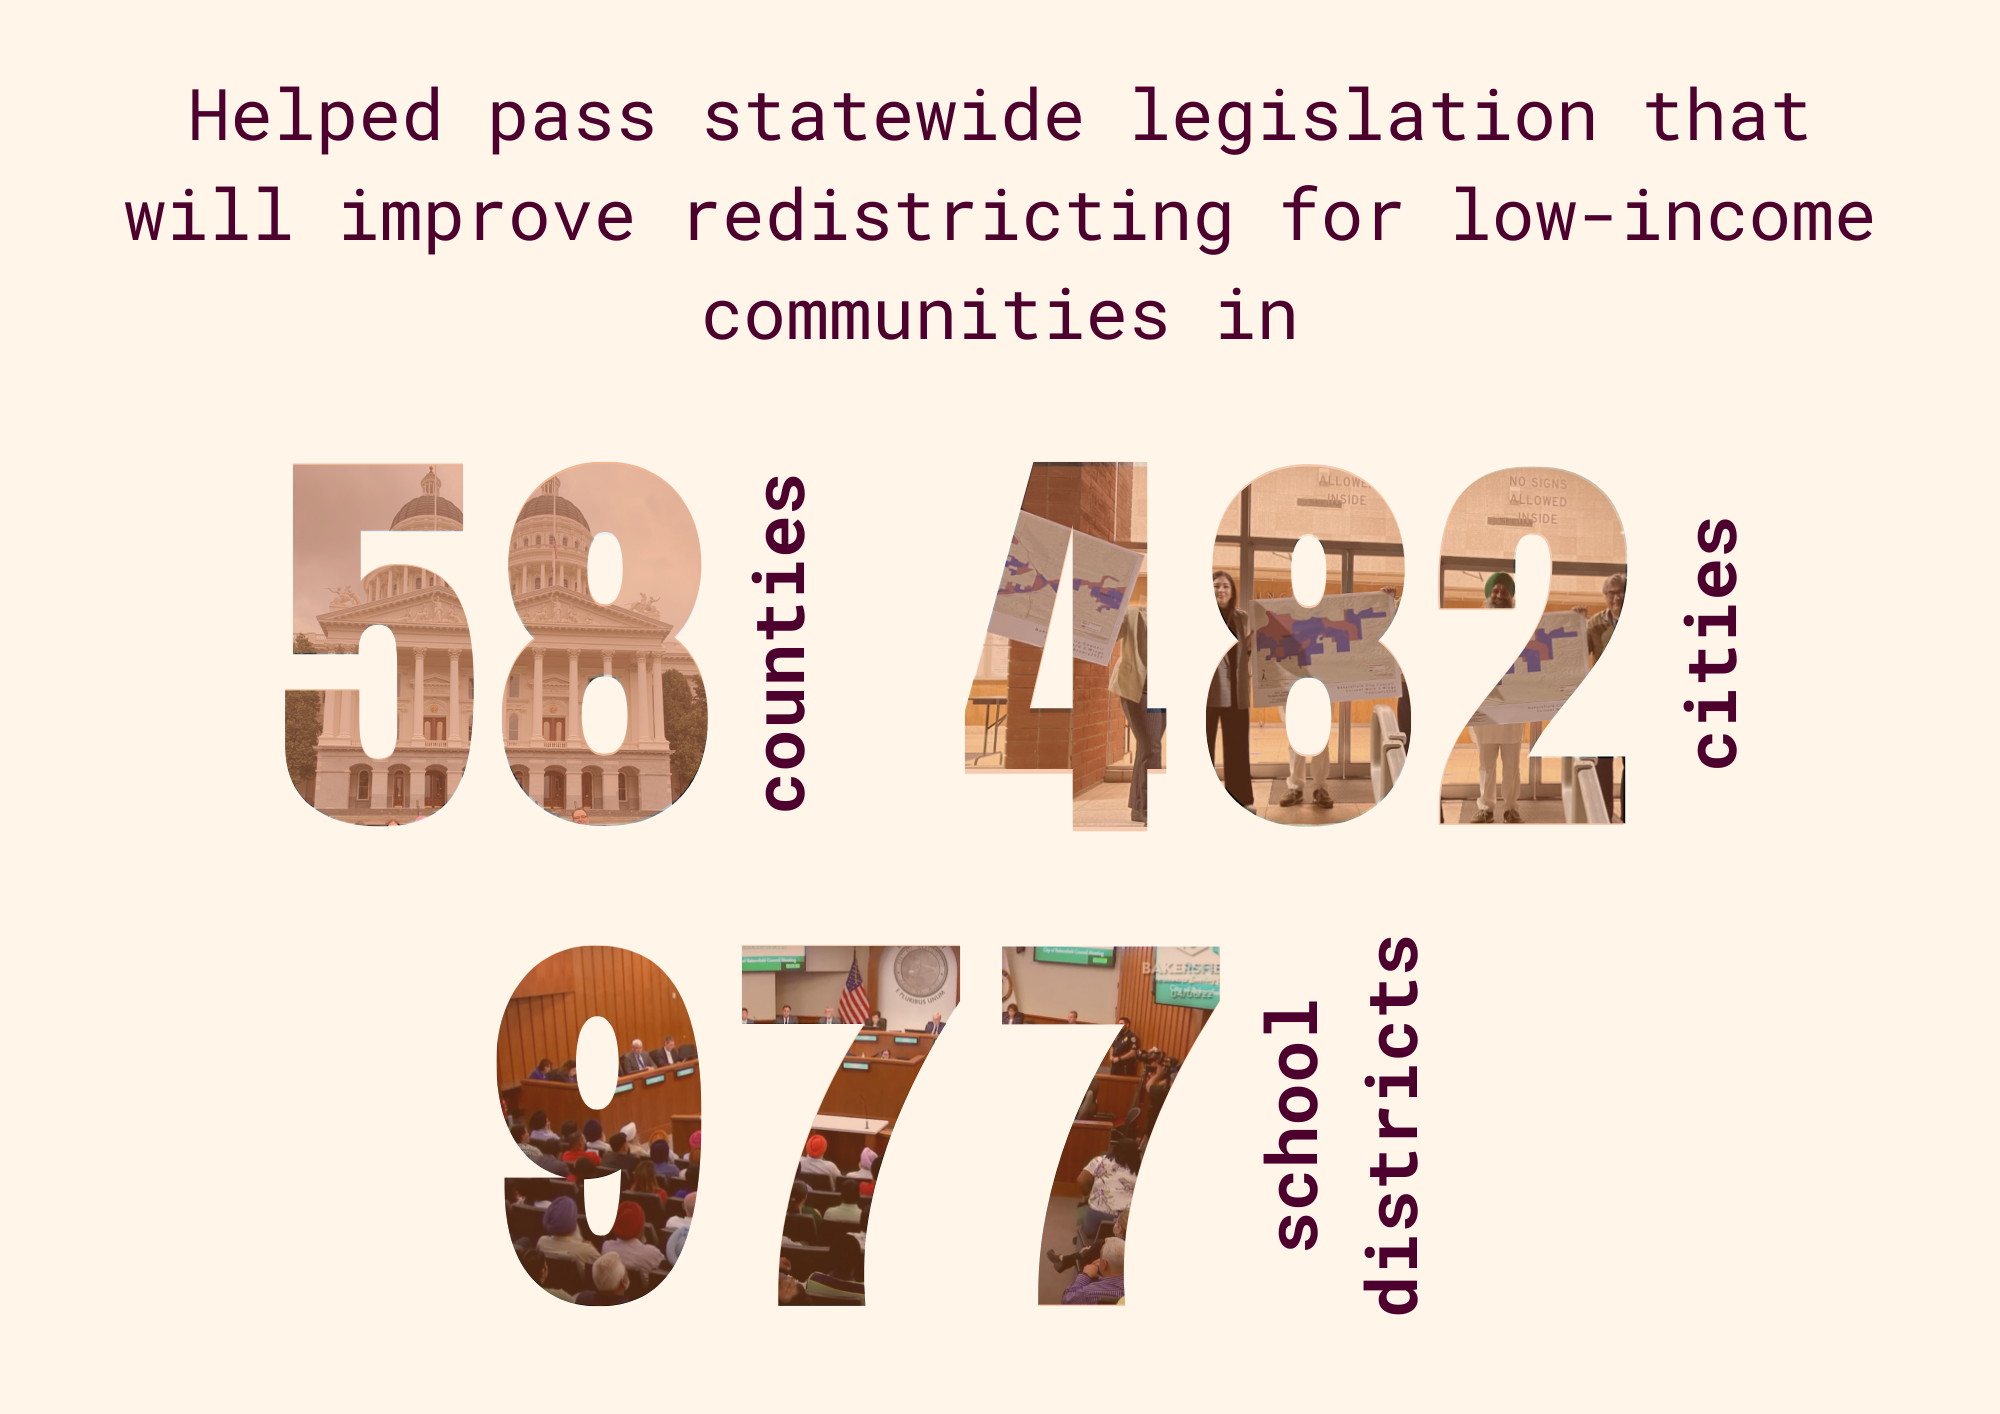 ALC helped pass statewide legislation that will improve redistricting for low-income communities in 58 counties, 482 cities, and 977 school districts in California.